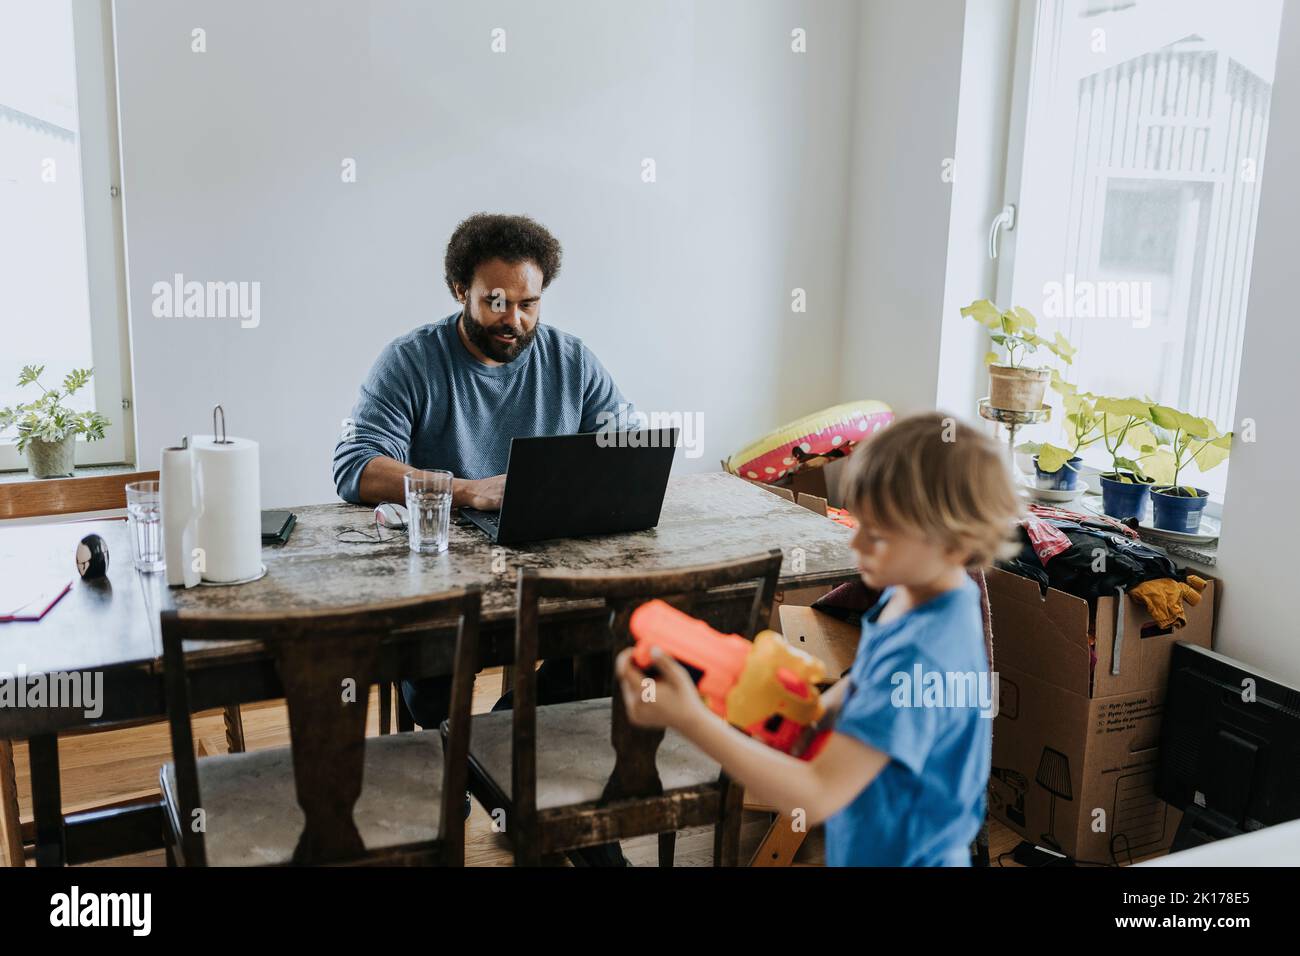 Man working from home and taking care of child Stock Photo